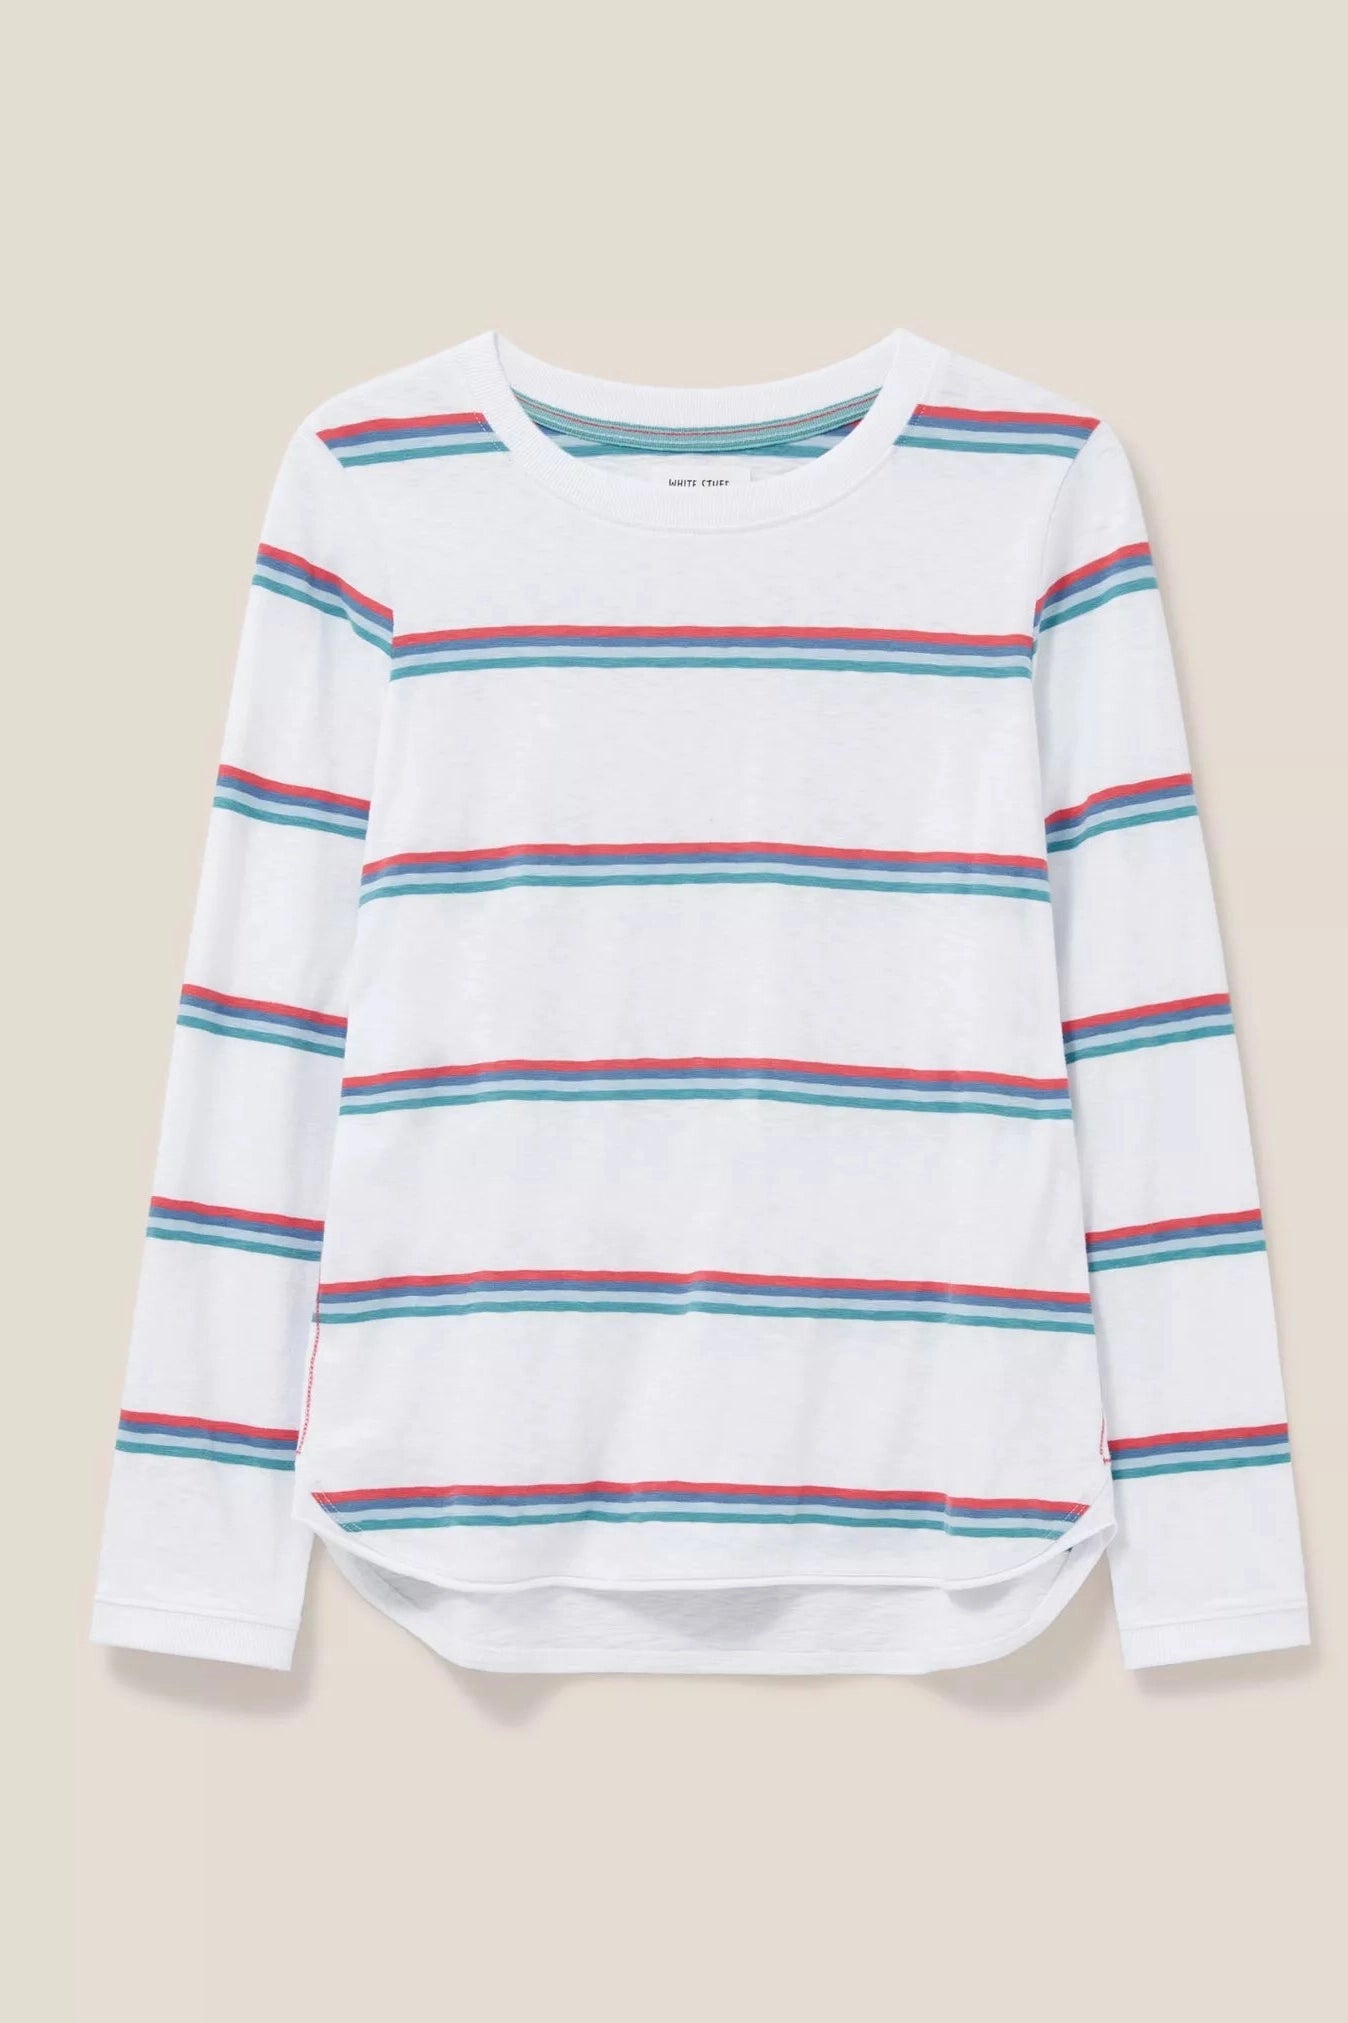 White Stuff Cassie Stripe Fairtrade Tee in White Multi-Womens-Ohh! By Gum - Shop Sustainable